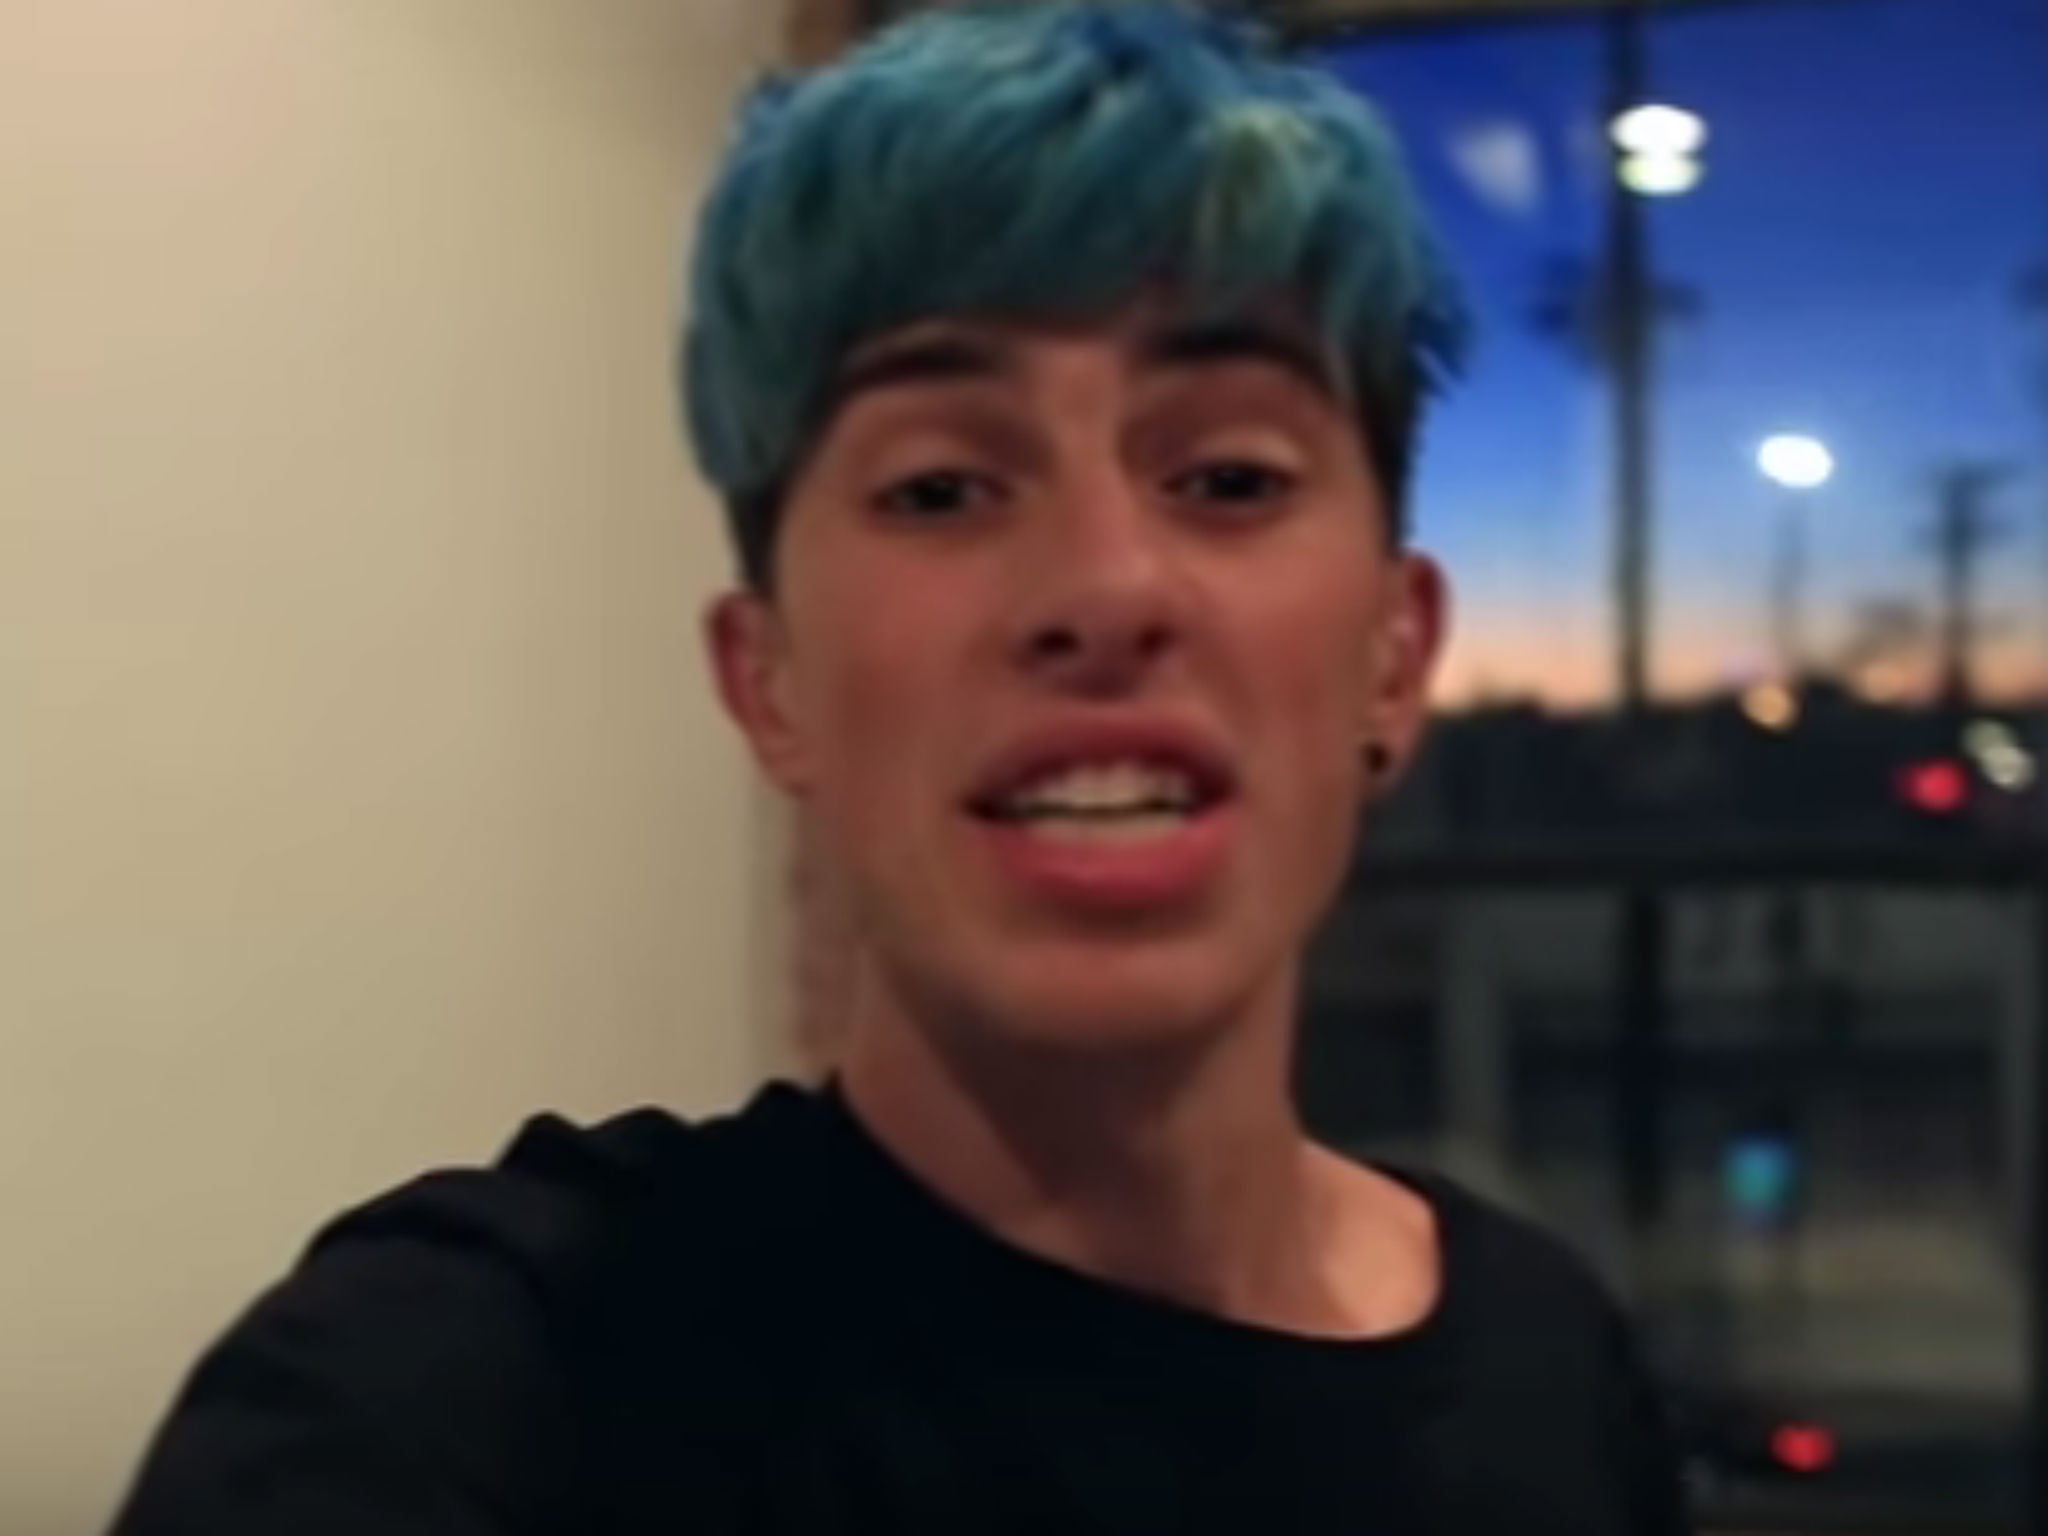 Sam Pepper Heavily Criticised For Vile Fake Murder Prank Video The Independent The Independent